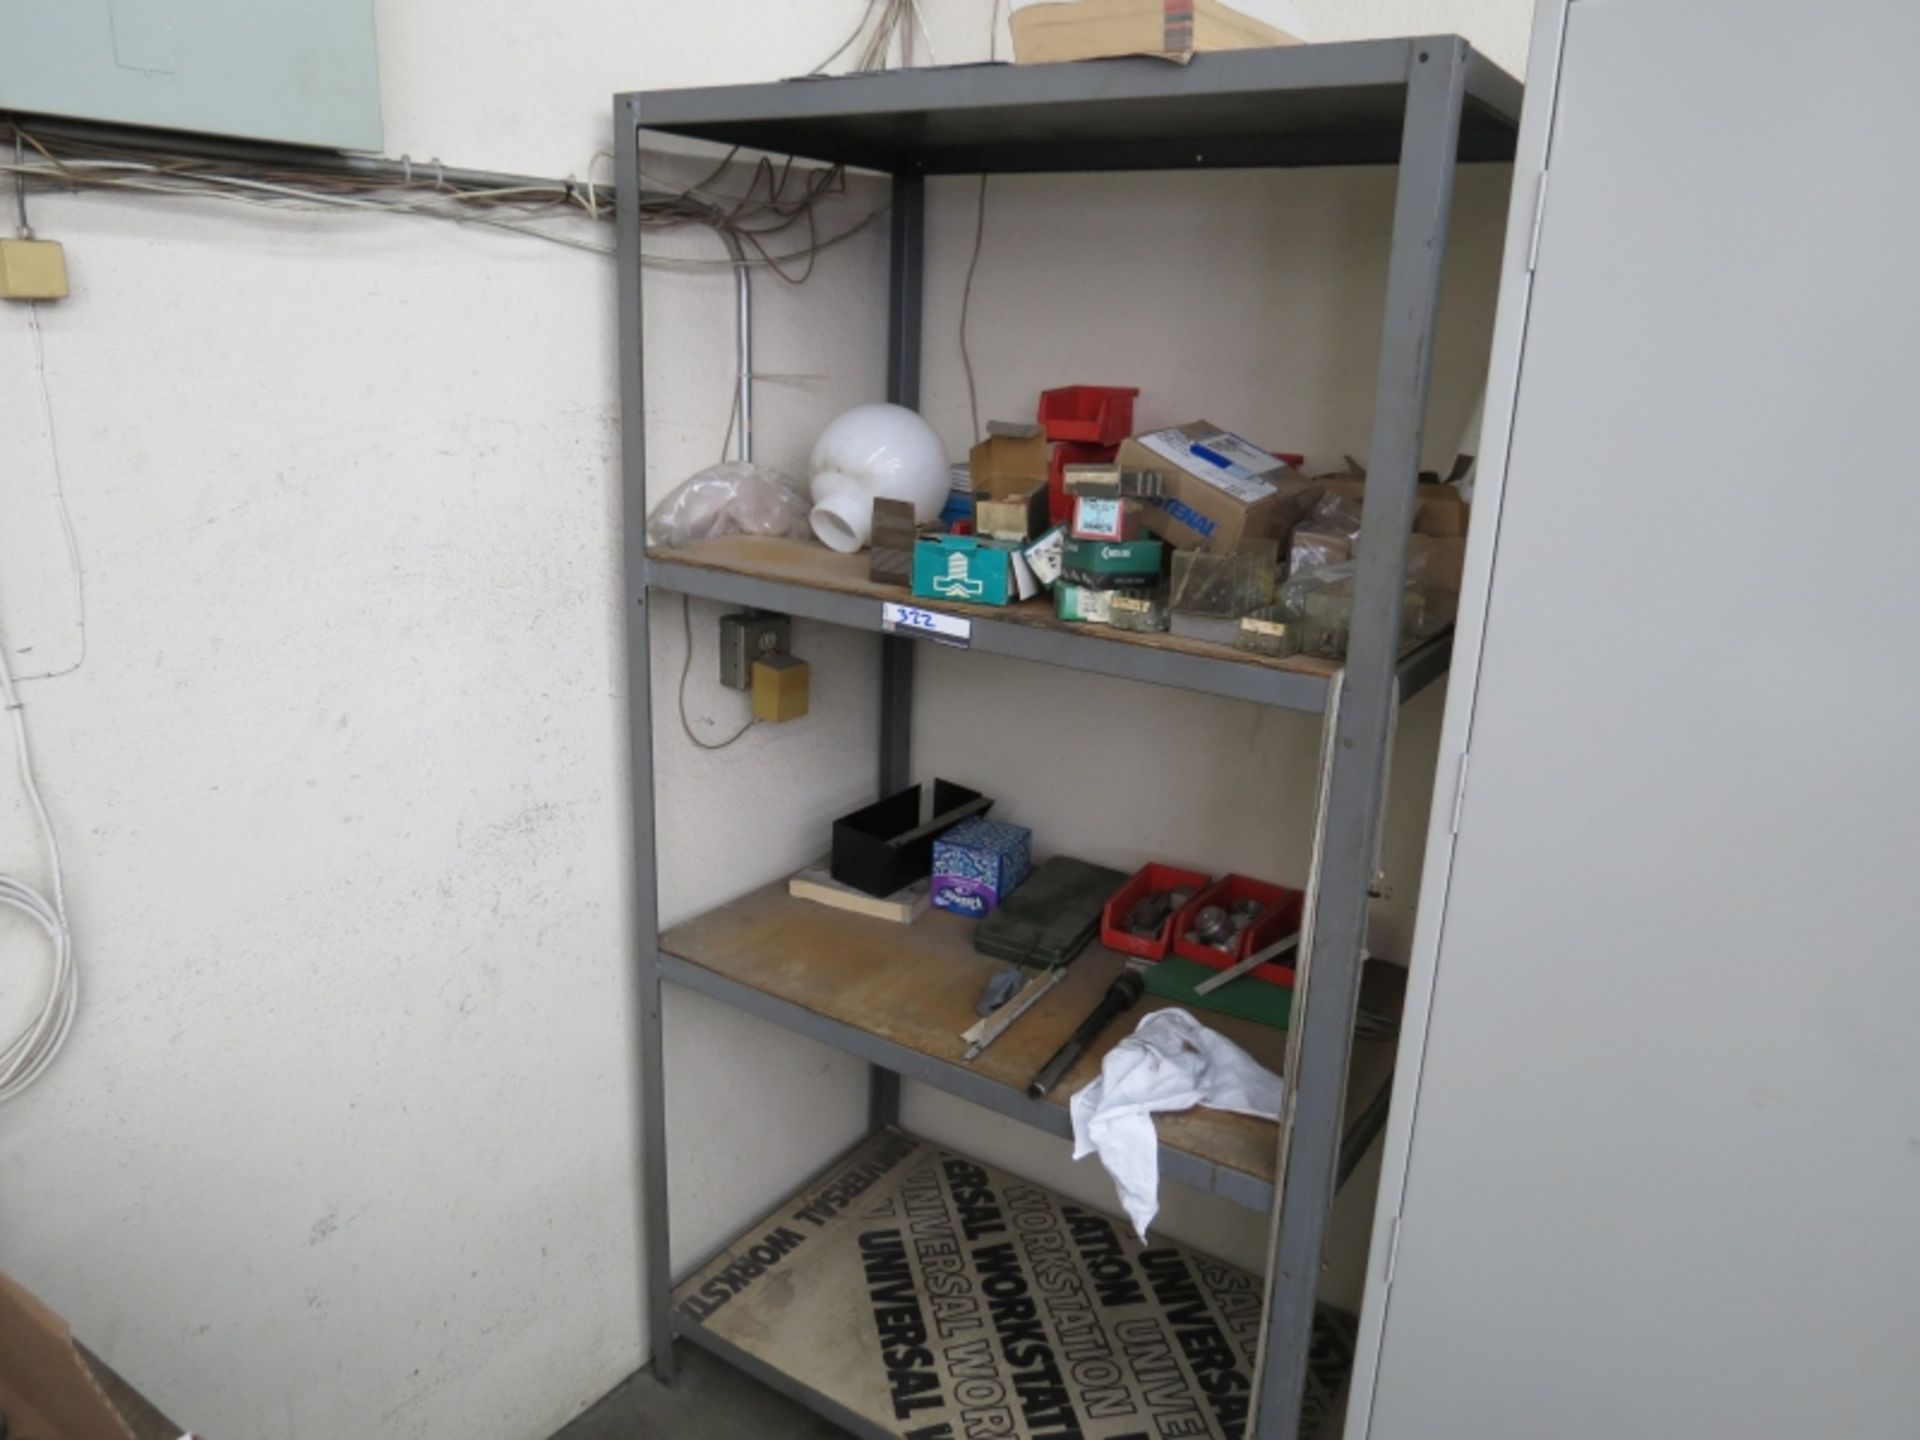 Shelving Unit with Content